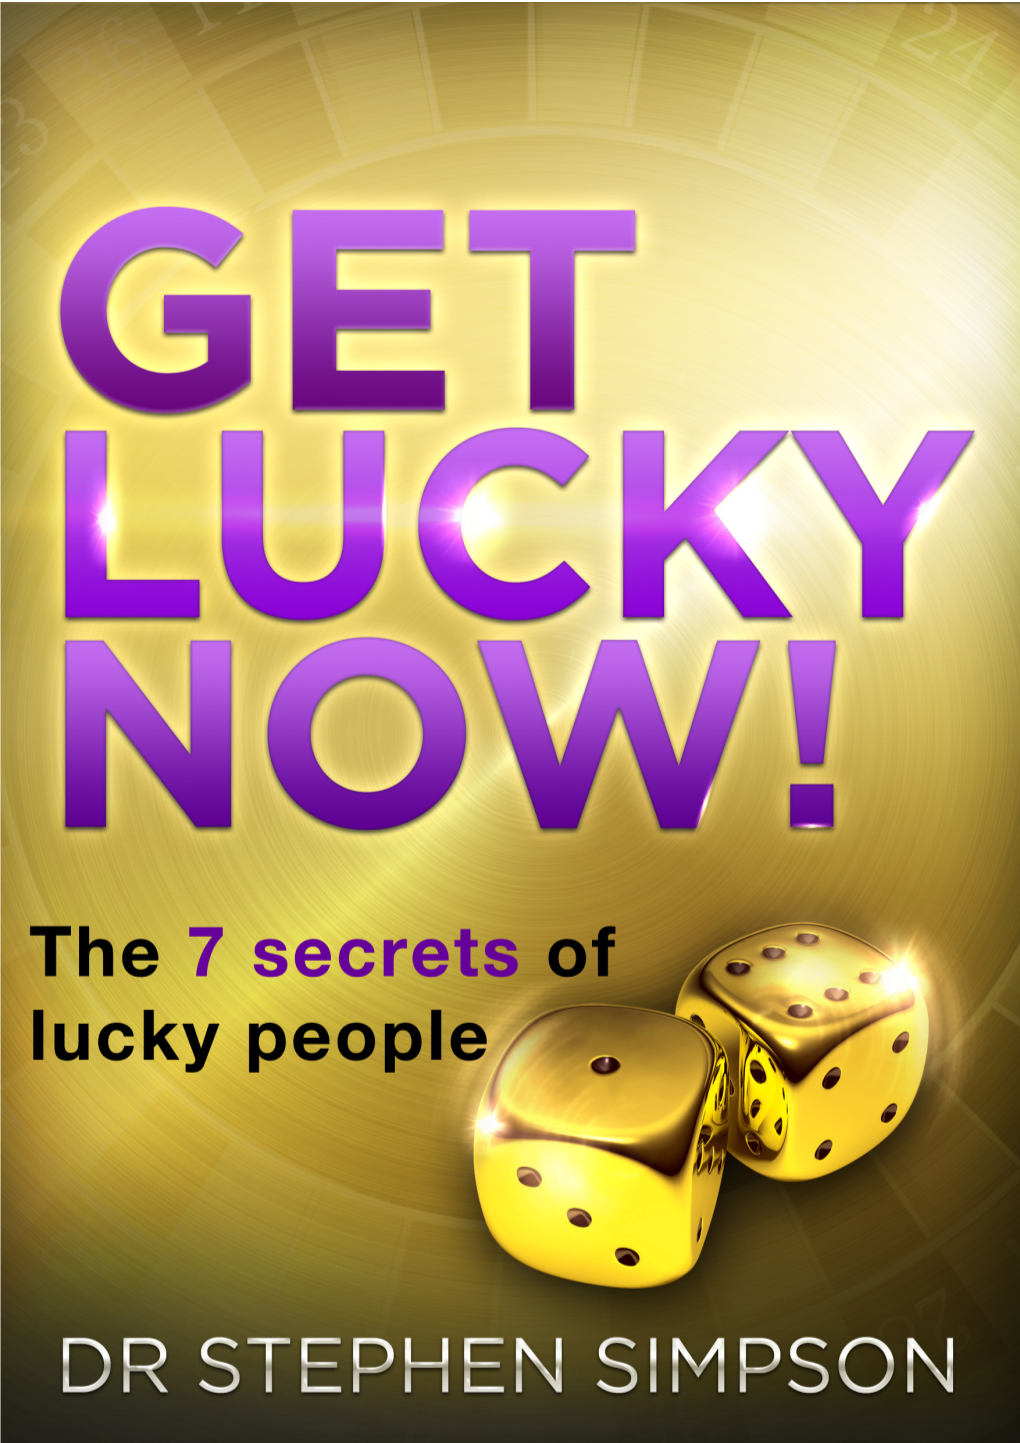 Get Lucky Now! - © Dr